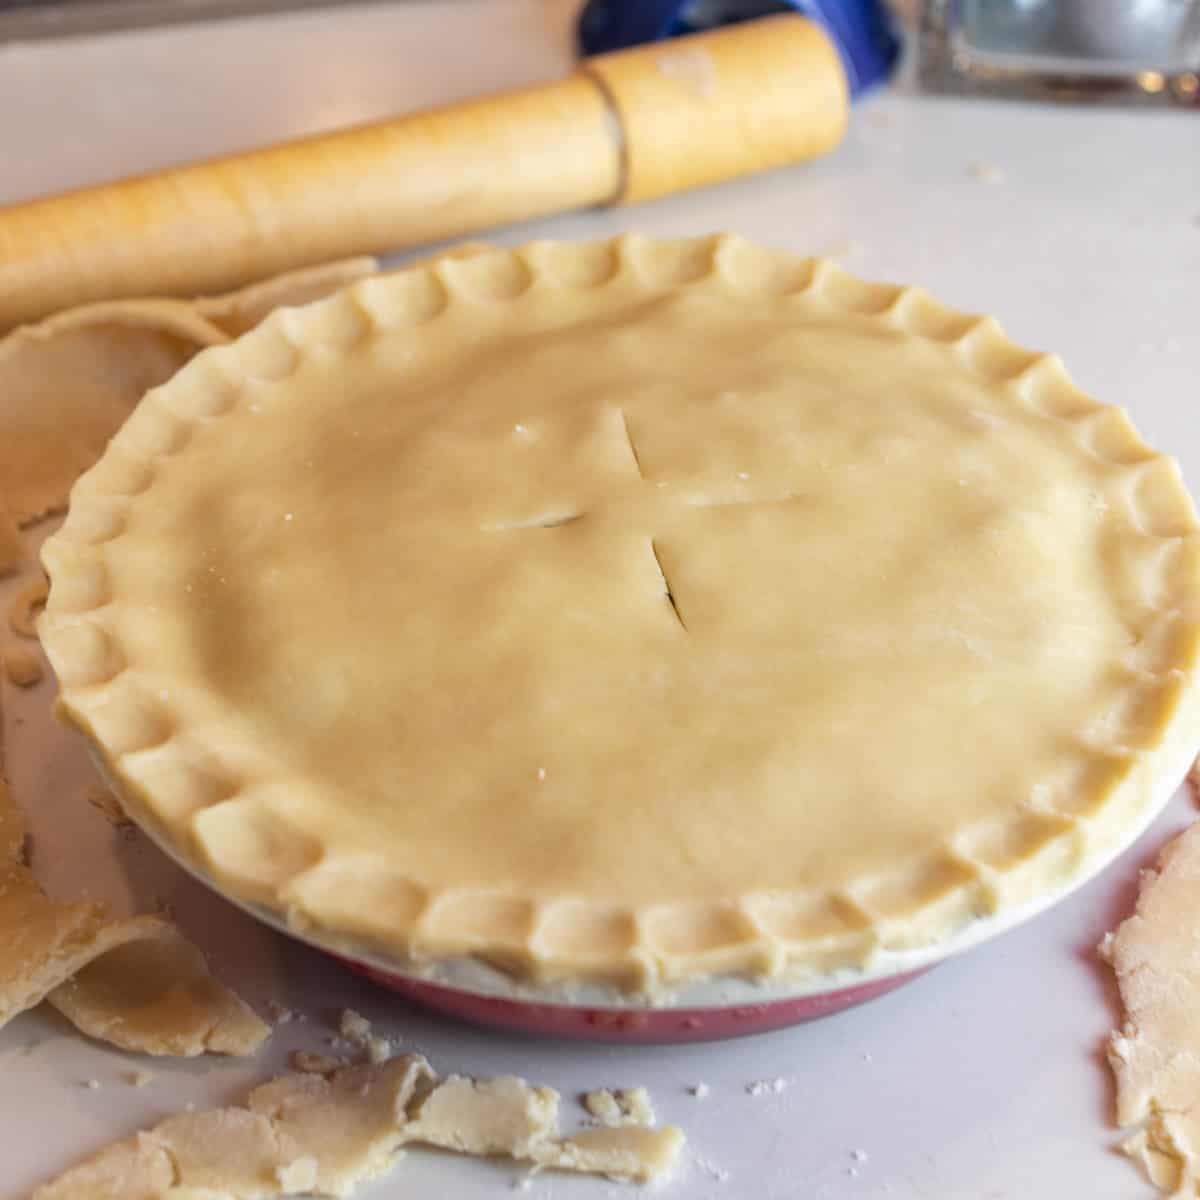 Unbaked pie with a rolling pin behind.